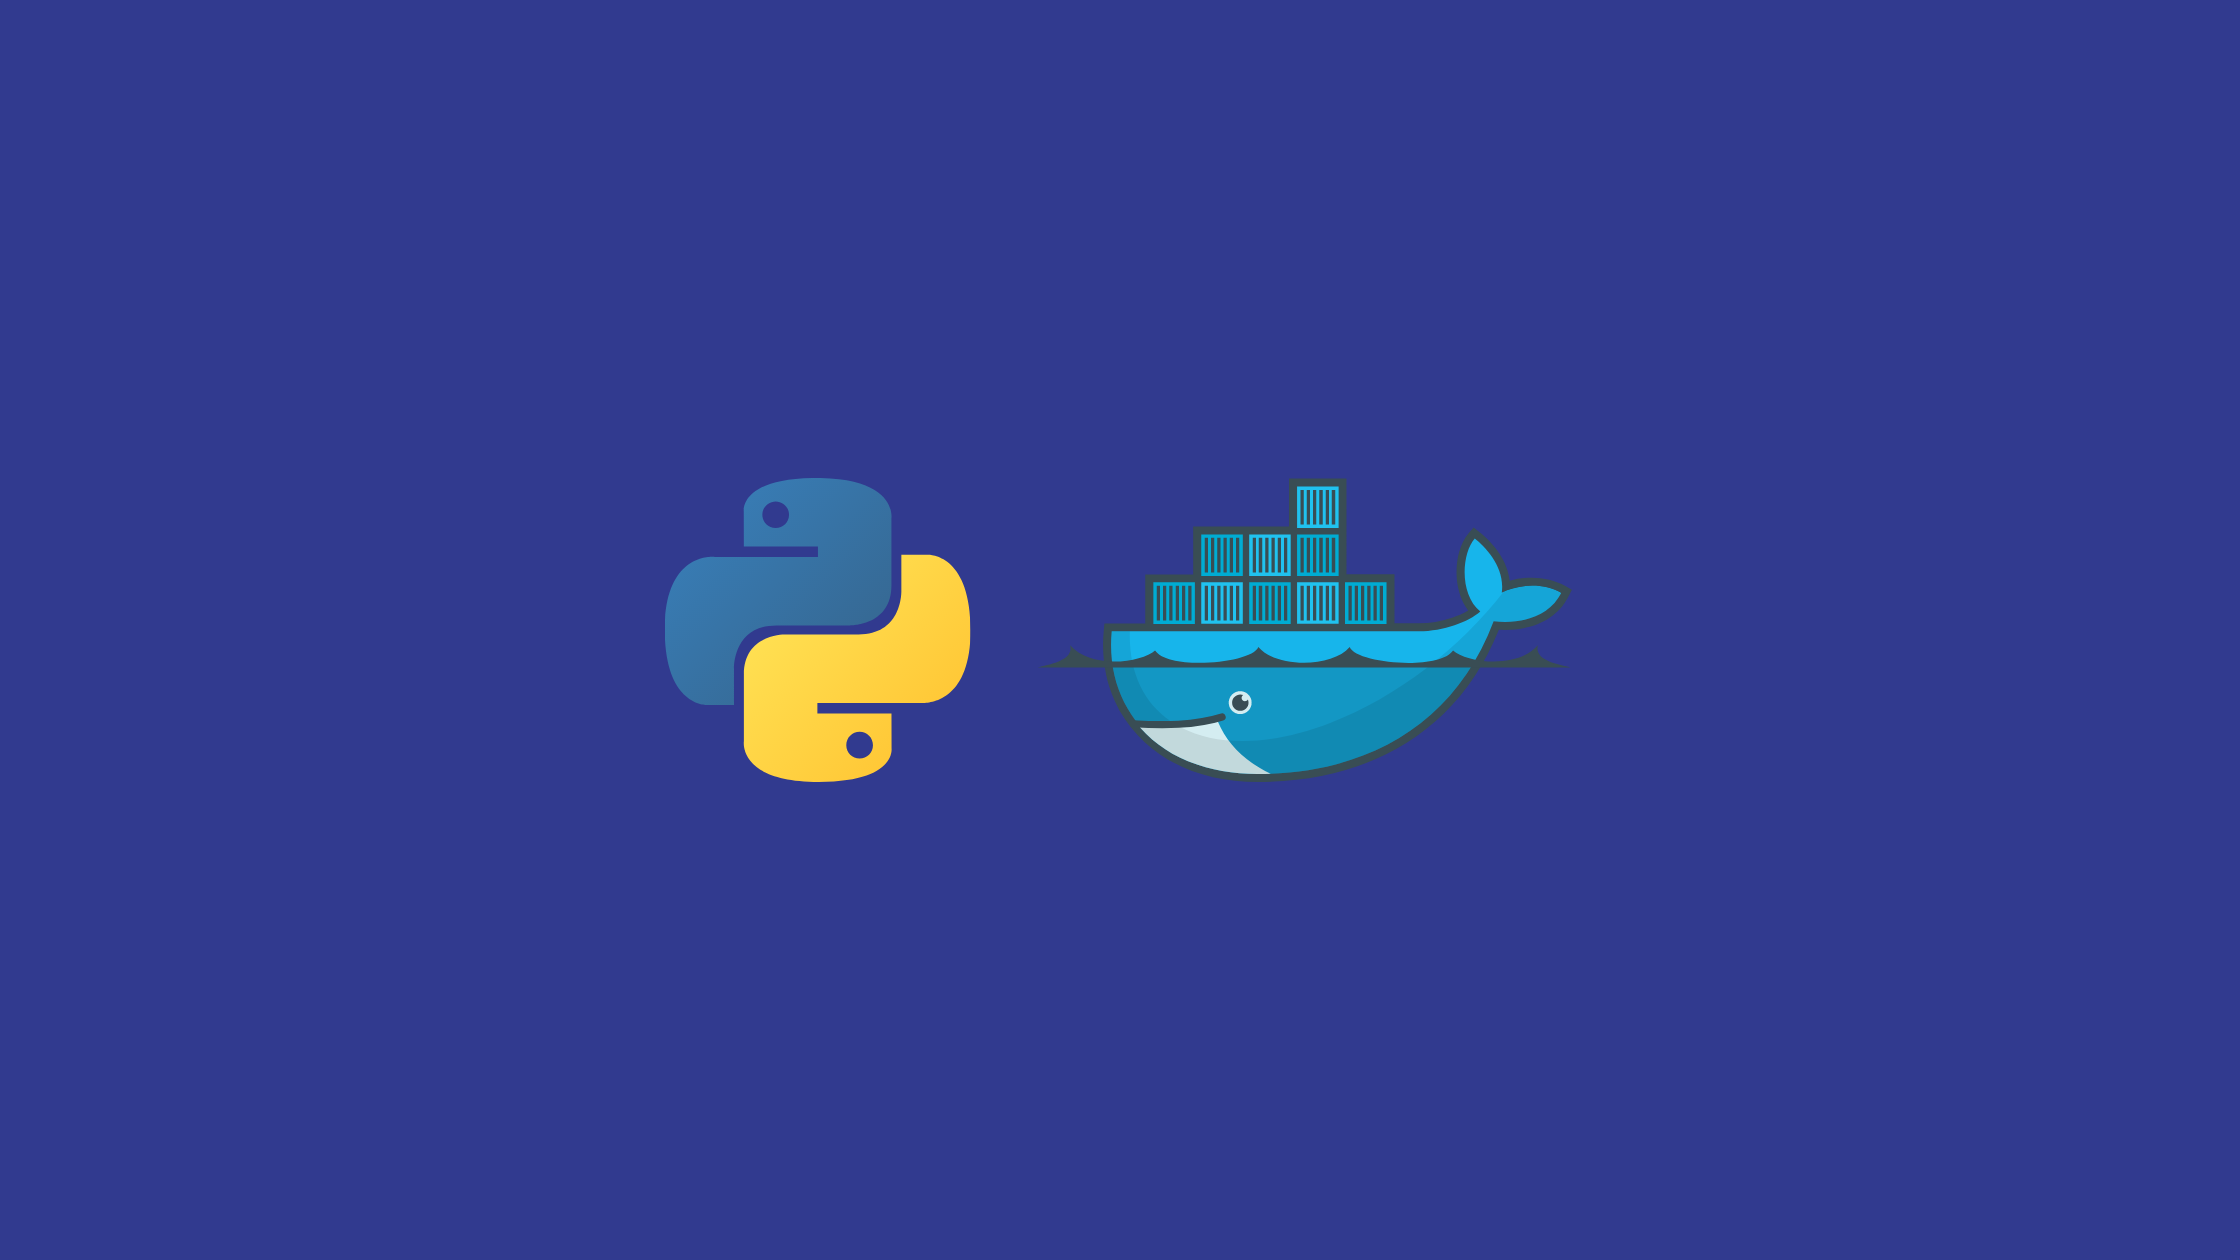 Deploy the Python Application in Kubernetes